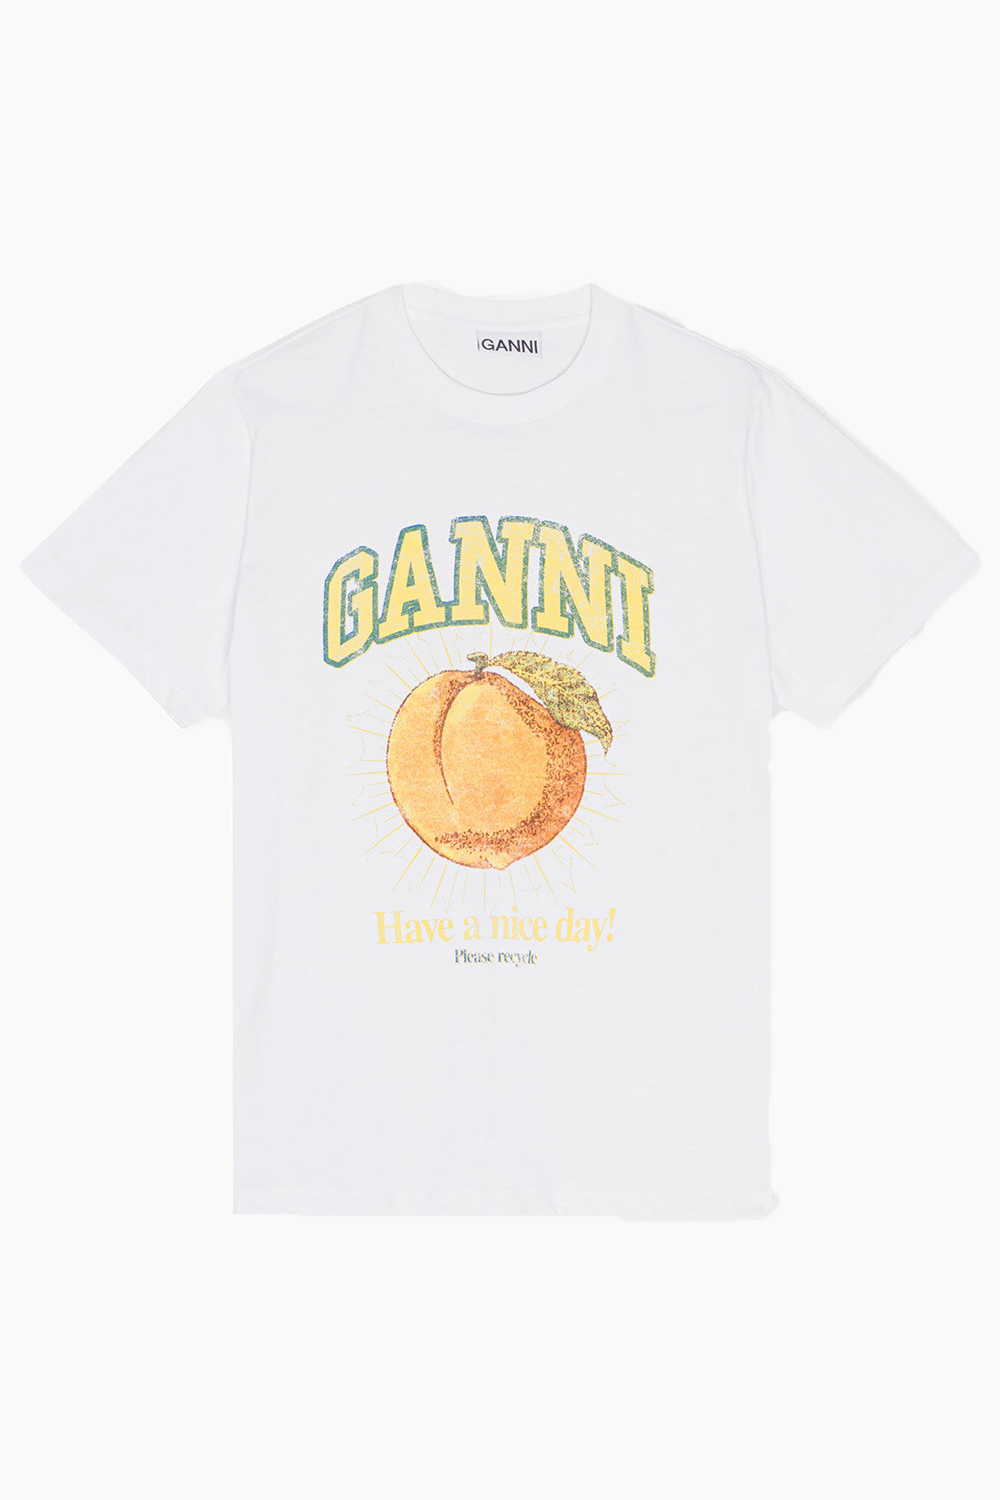 Basic Jersey Peach Relaxed T-Shirt T3529 - Bright White - GANNI